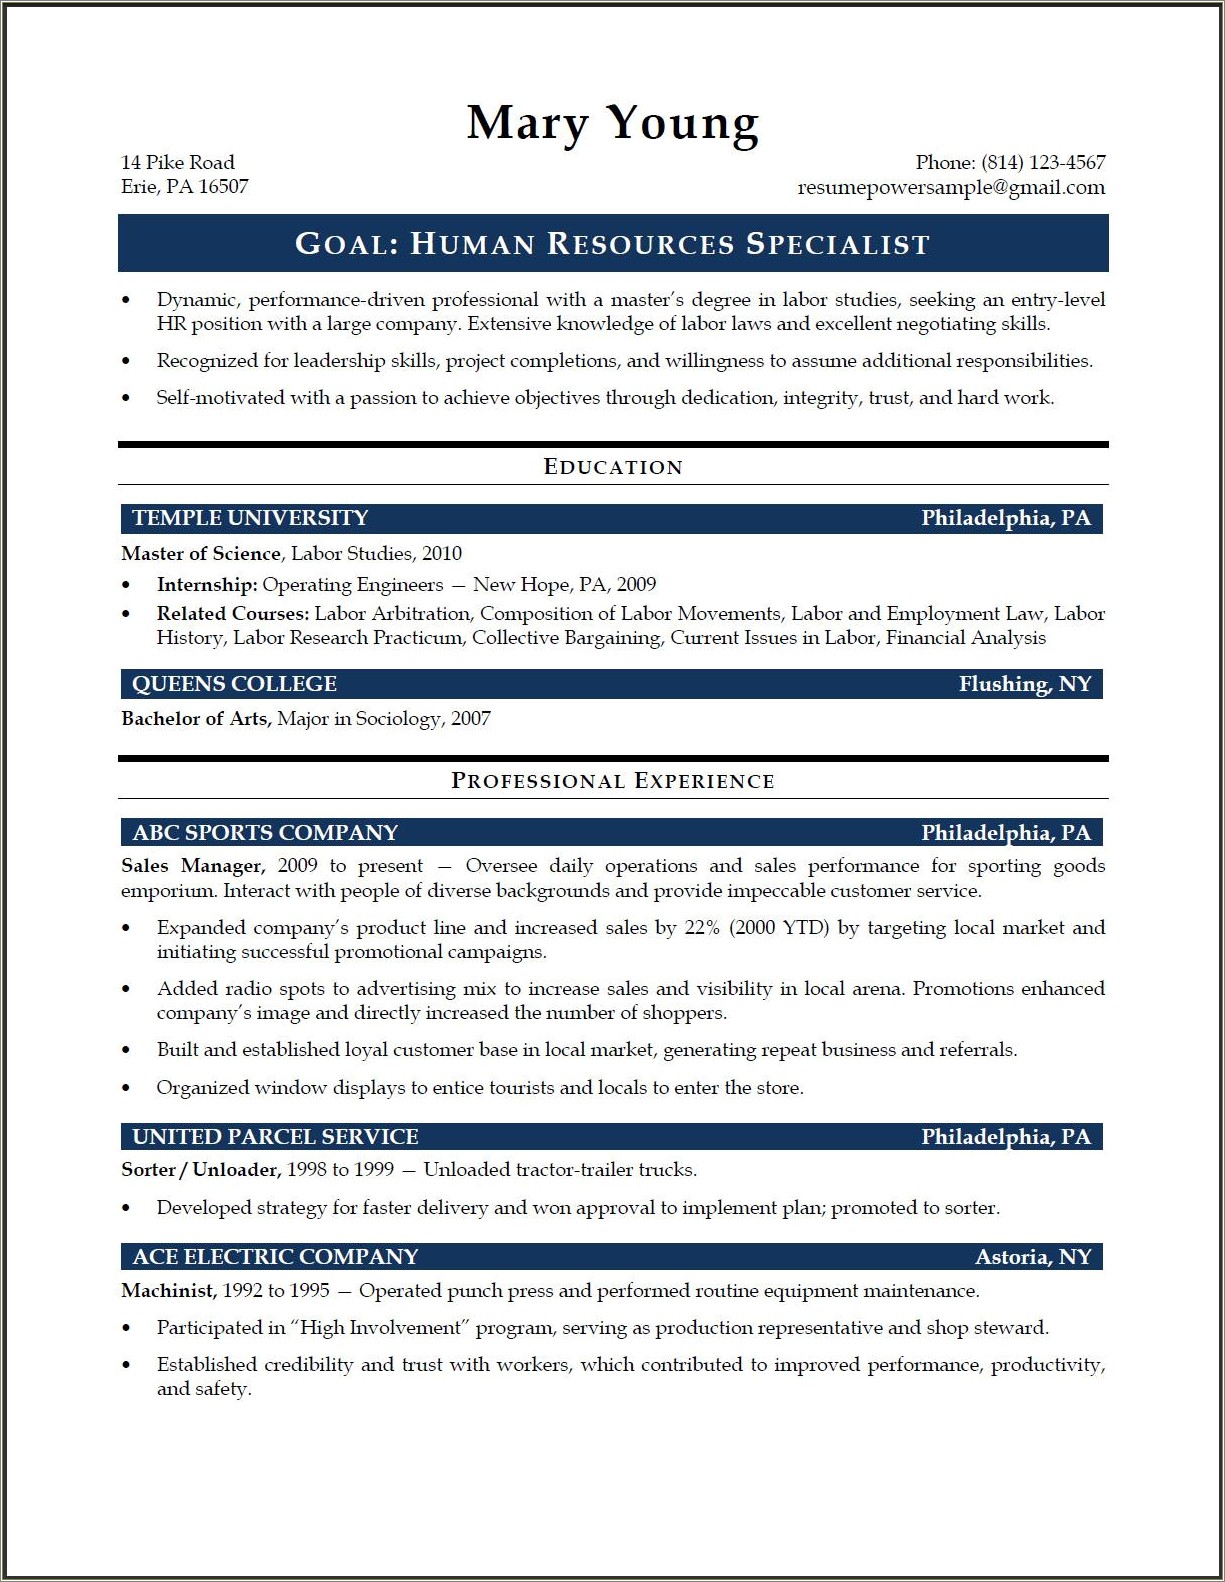 Human Resources Director For Law Firm Resume Example